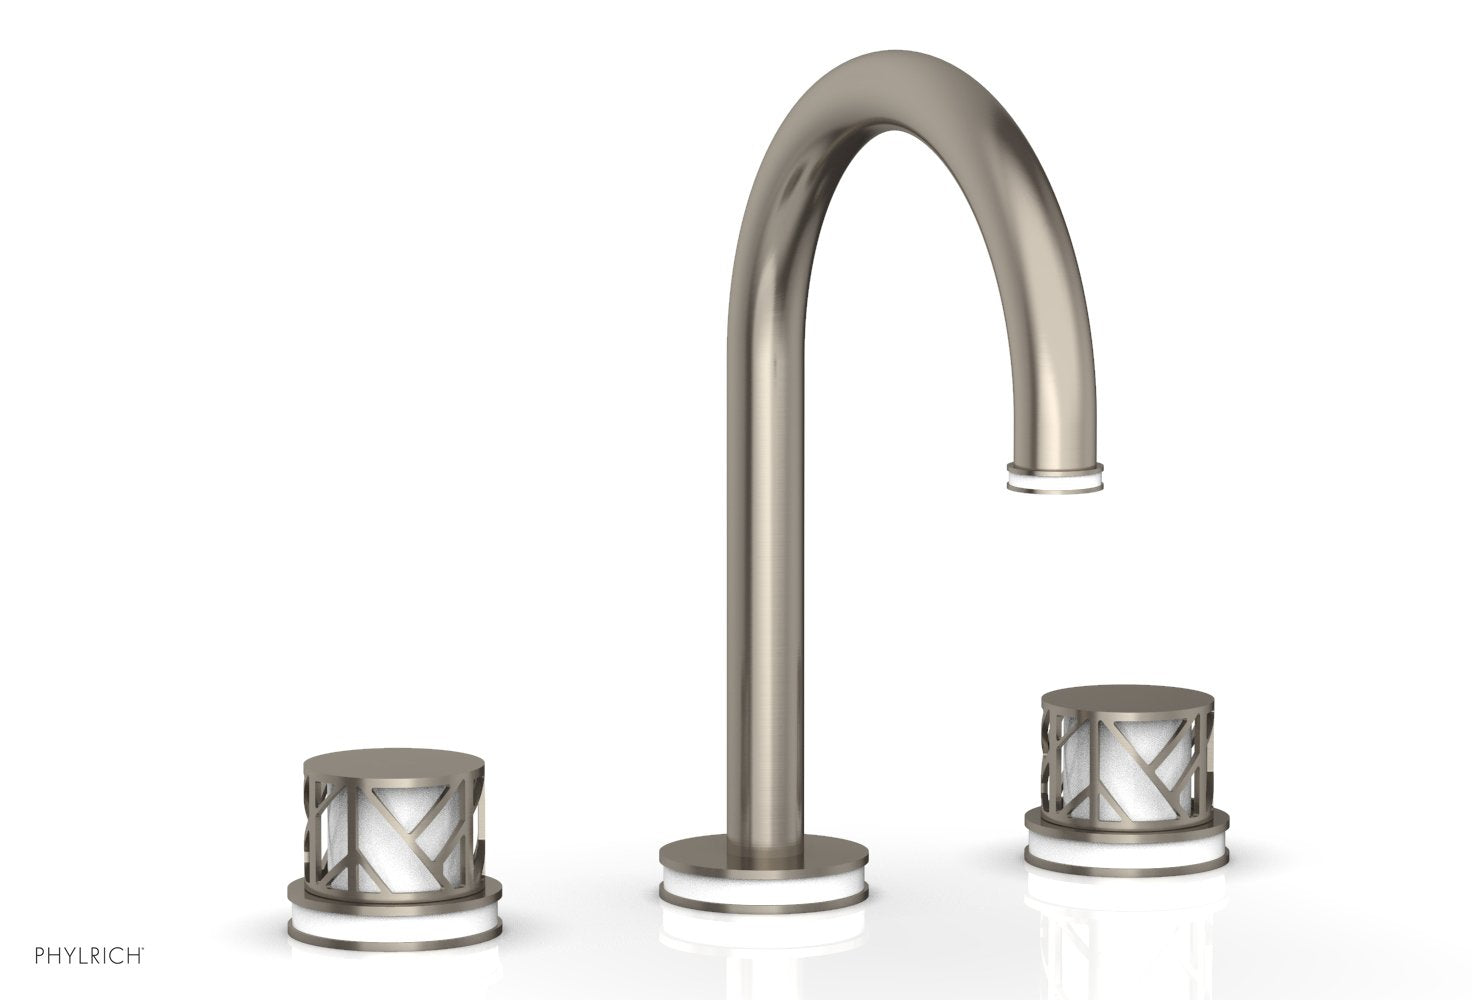 Phylrich JOLIE Widespread Faucet - Round Handles with "White" Accents